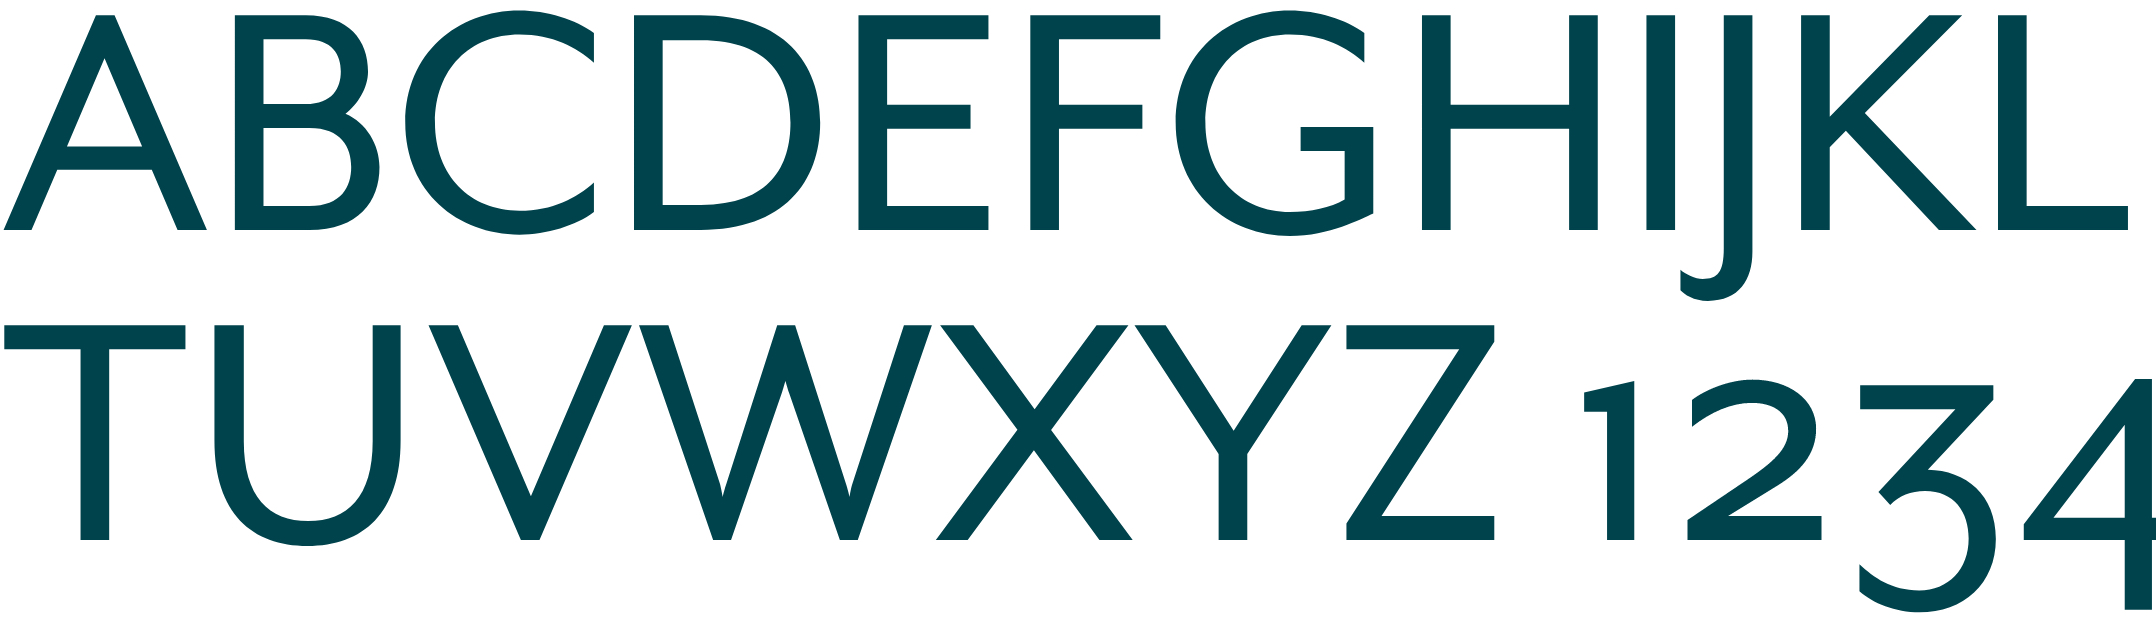 The Fat Duck typeface